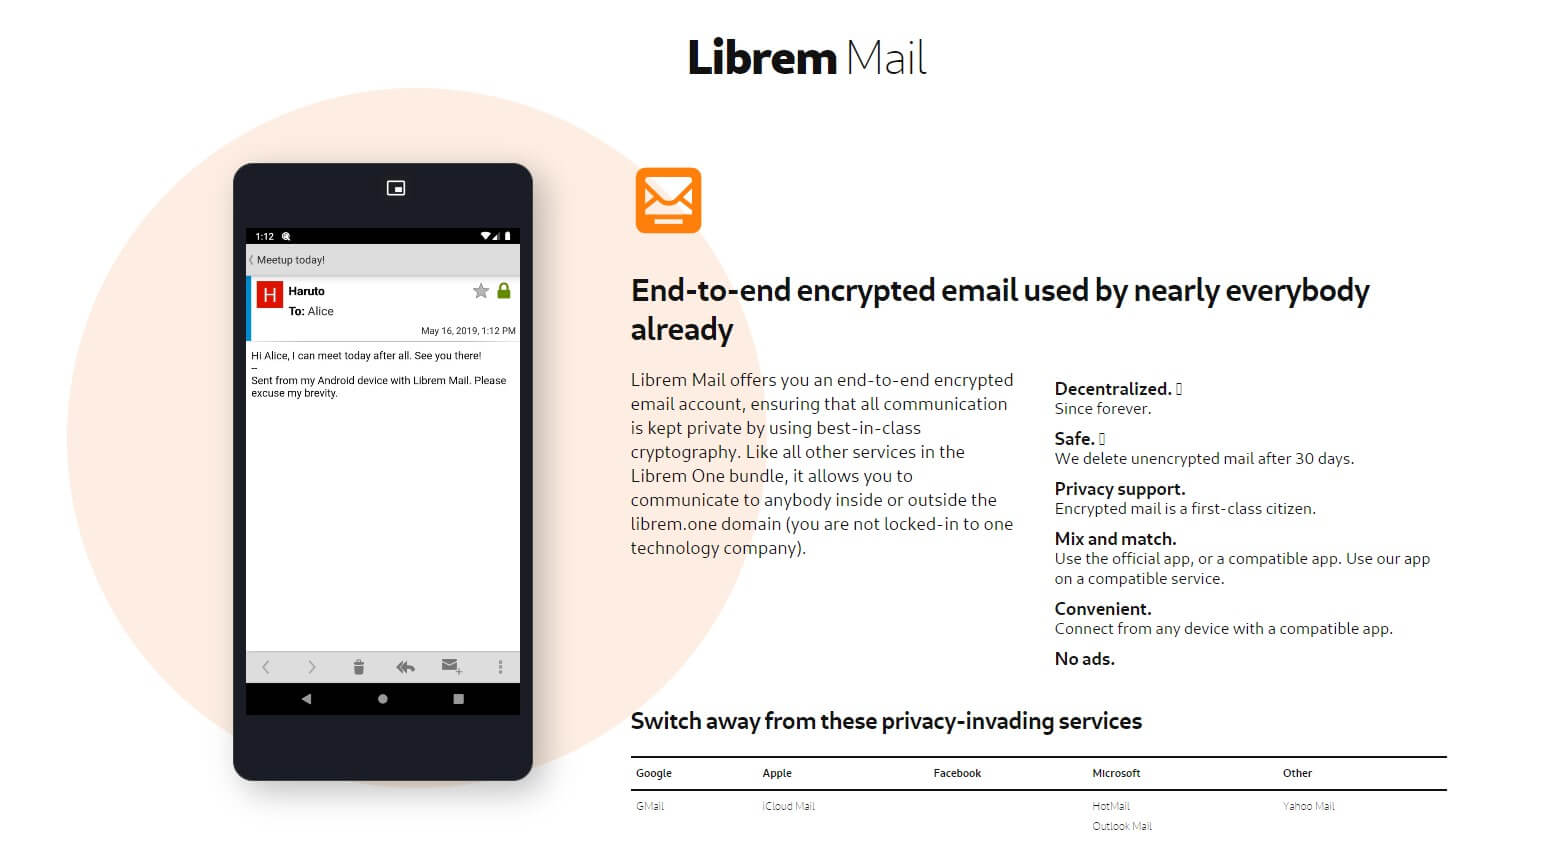 a screenshot of the librem mail banner on its website